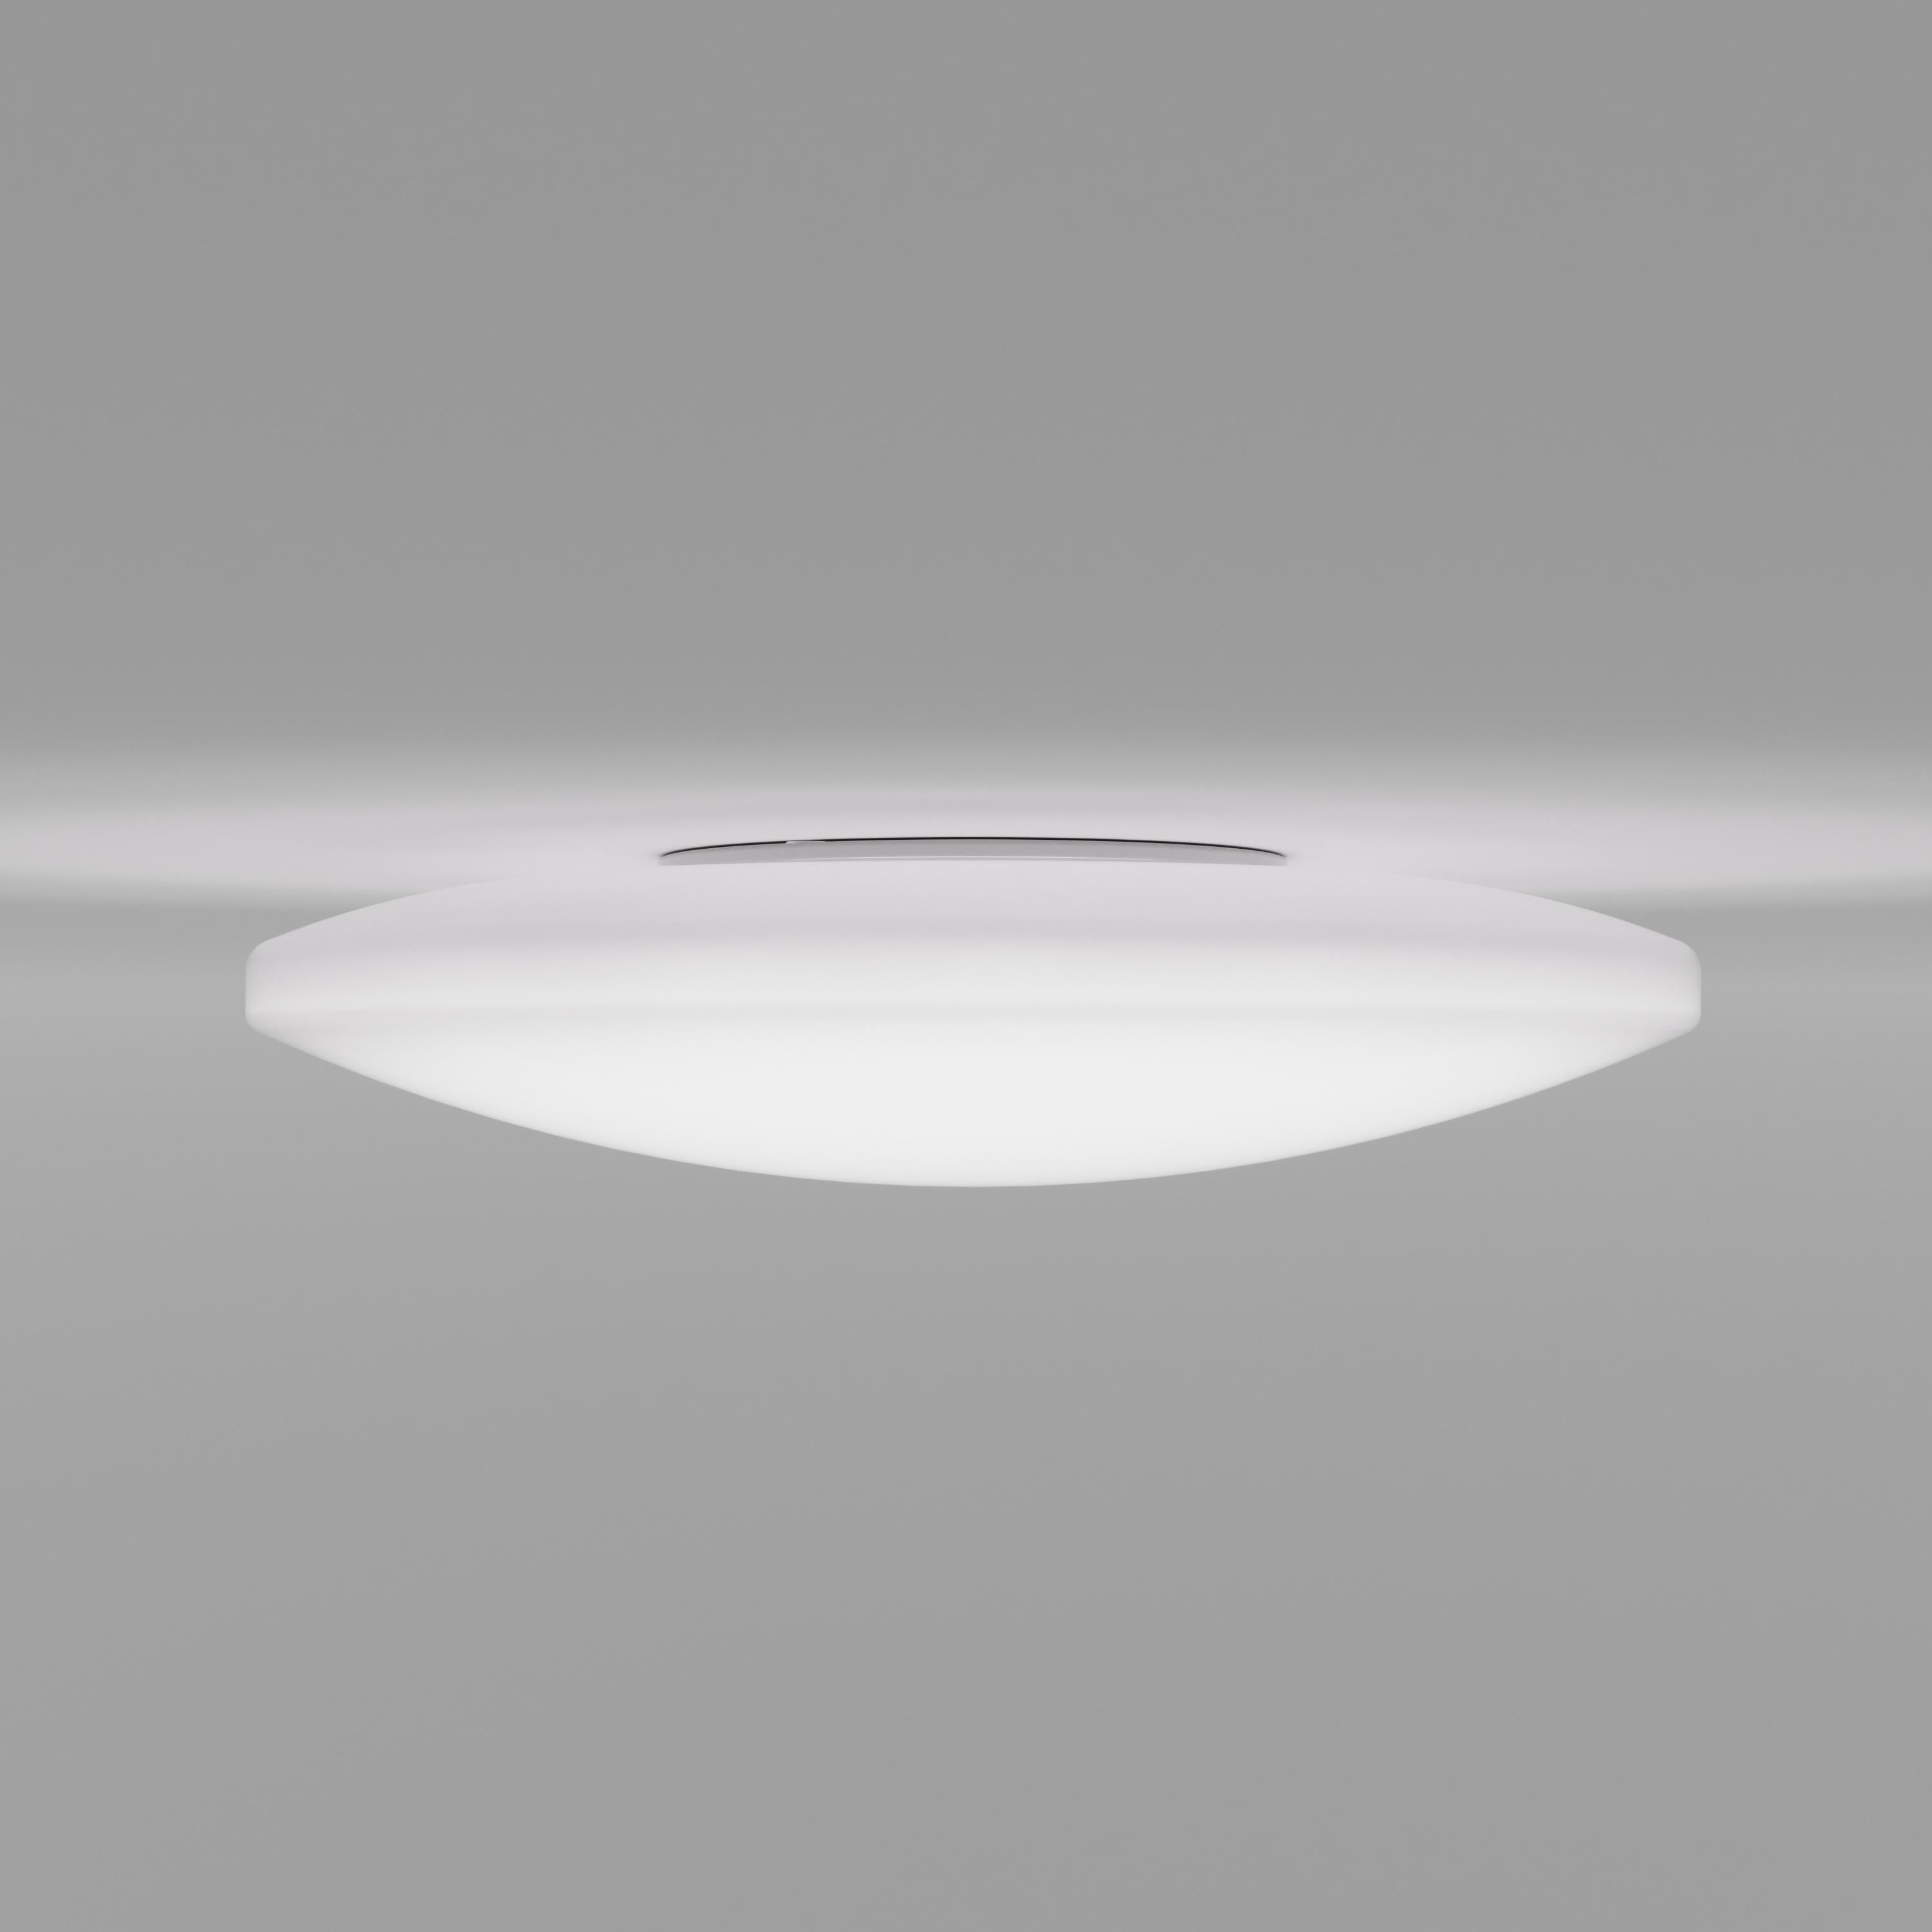 Moris is available in three different sizes. It can be placed both as a ceiling and a wall lamp. The lens shape of the matt finished glass diffuser optimises the light flow.

Specifications:
Material: Glass
Light source: E26 UL
No of bulbs: